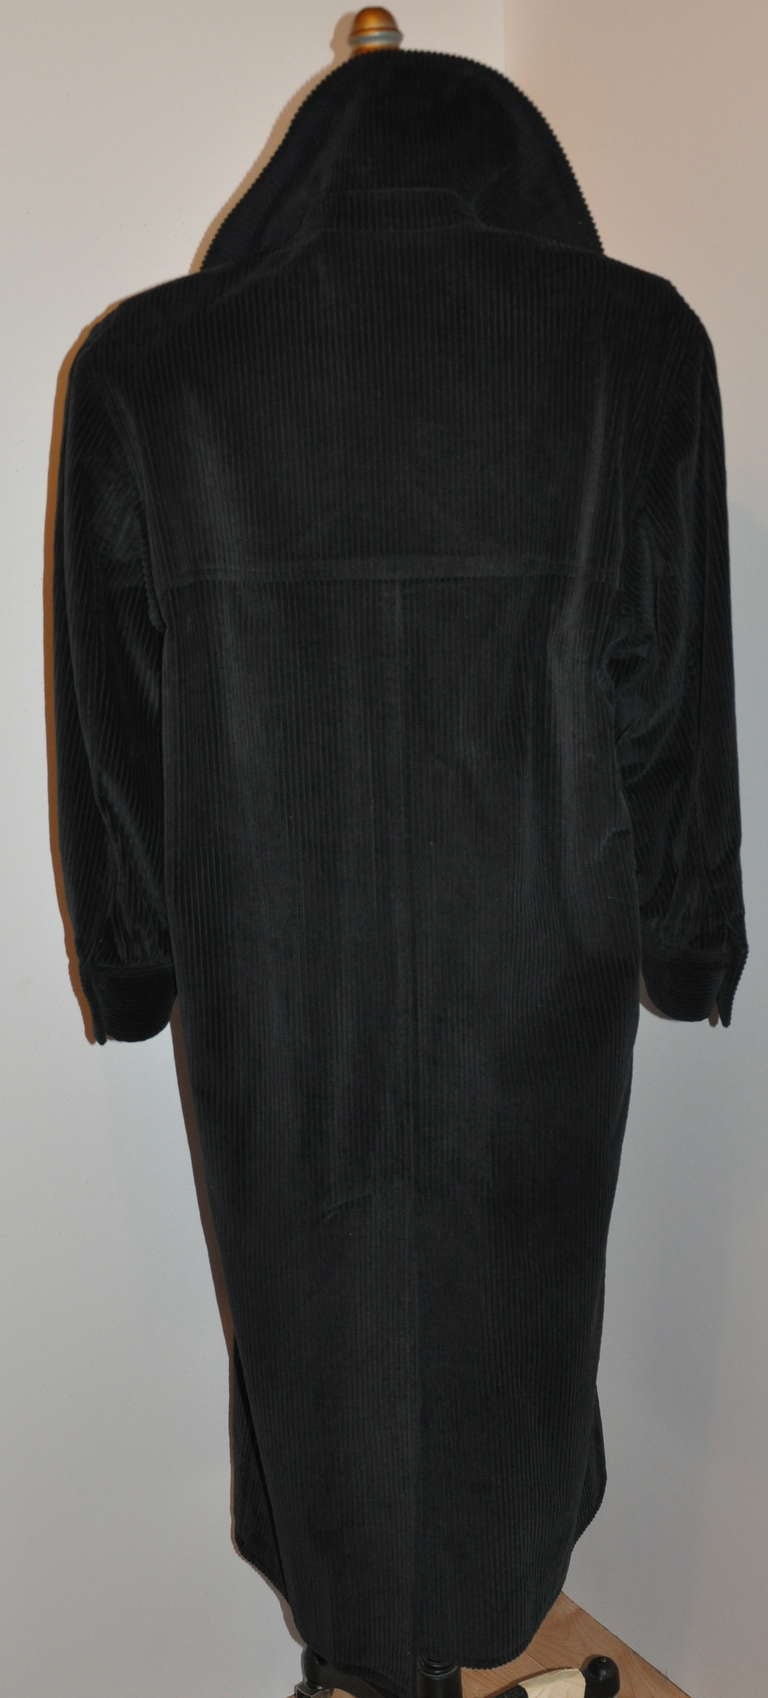 Yves Saint Laurent fully lined black corduroy double-breasted coat measures 47